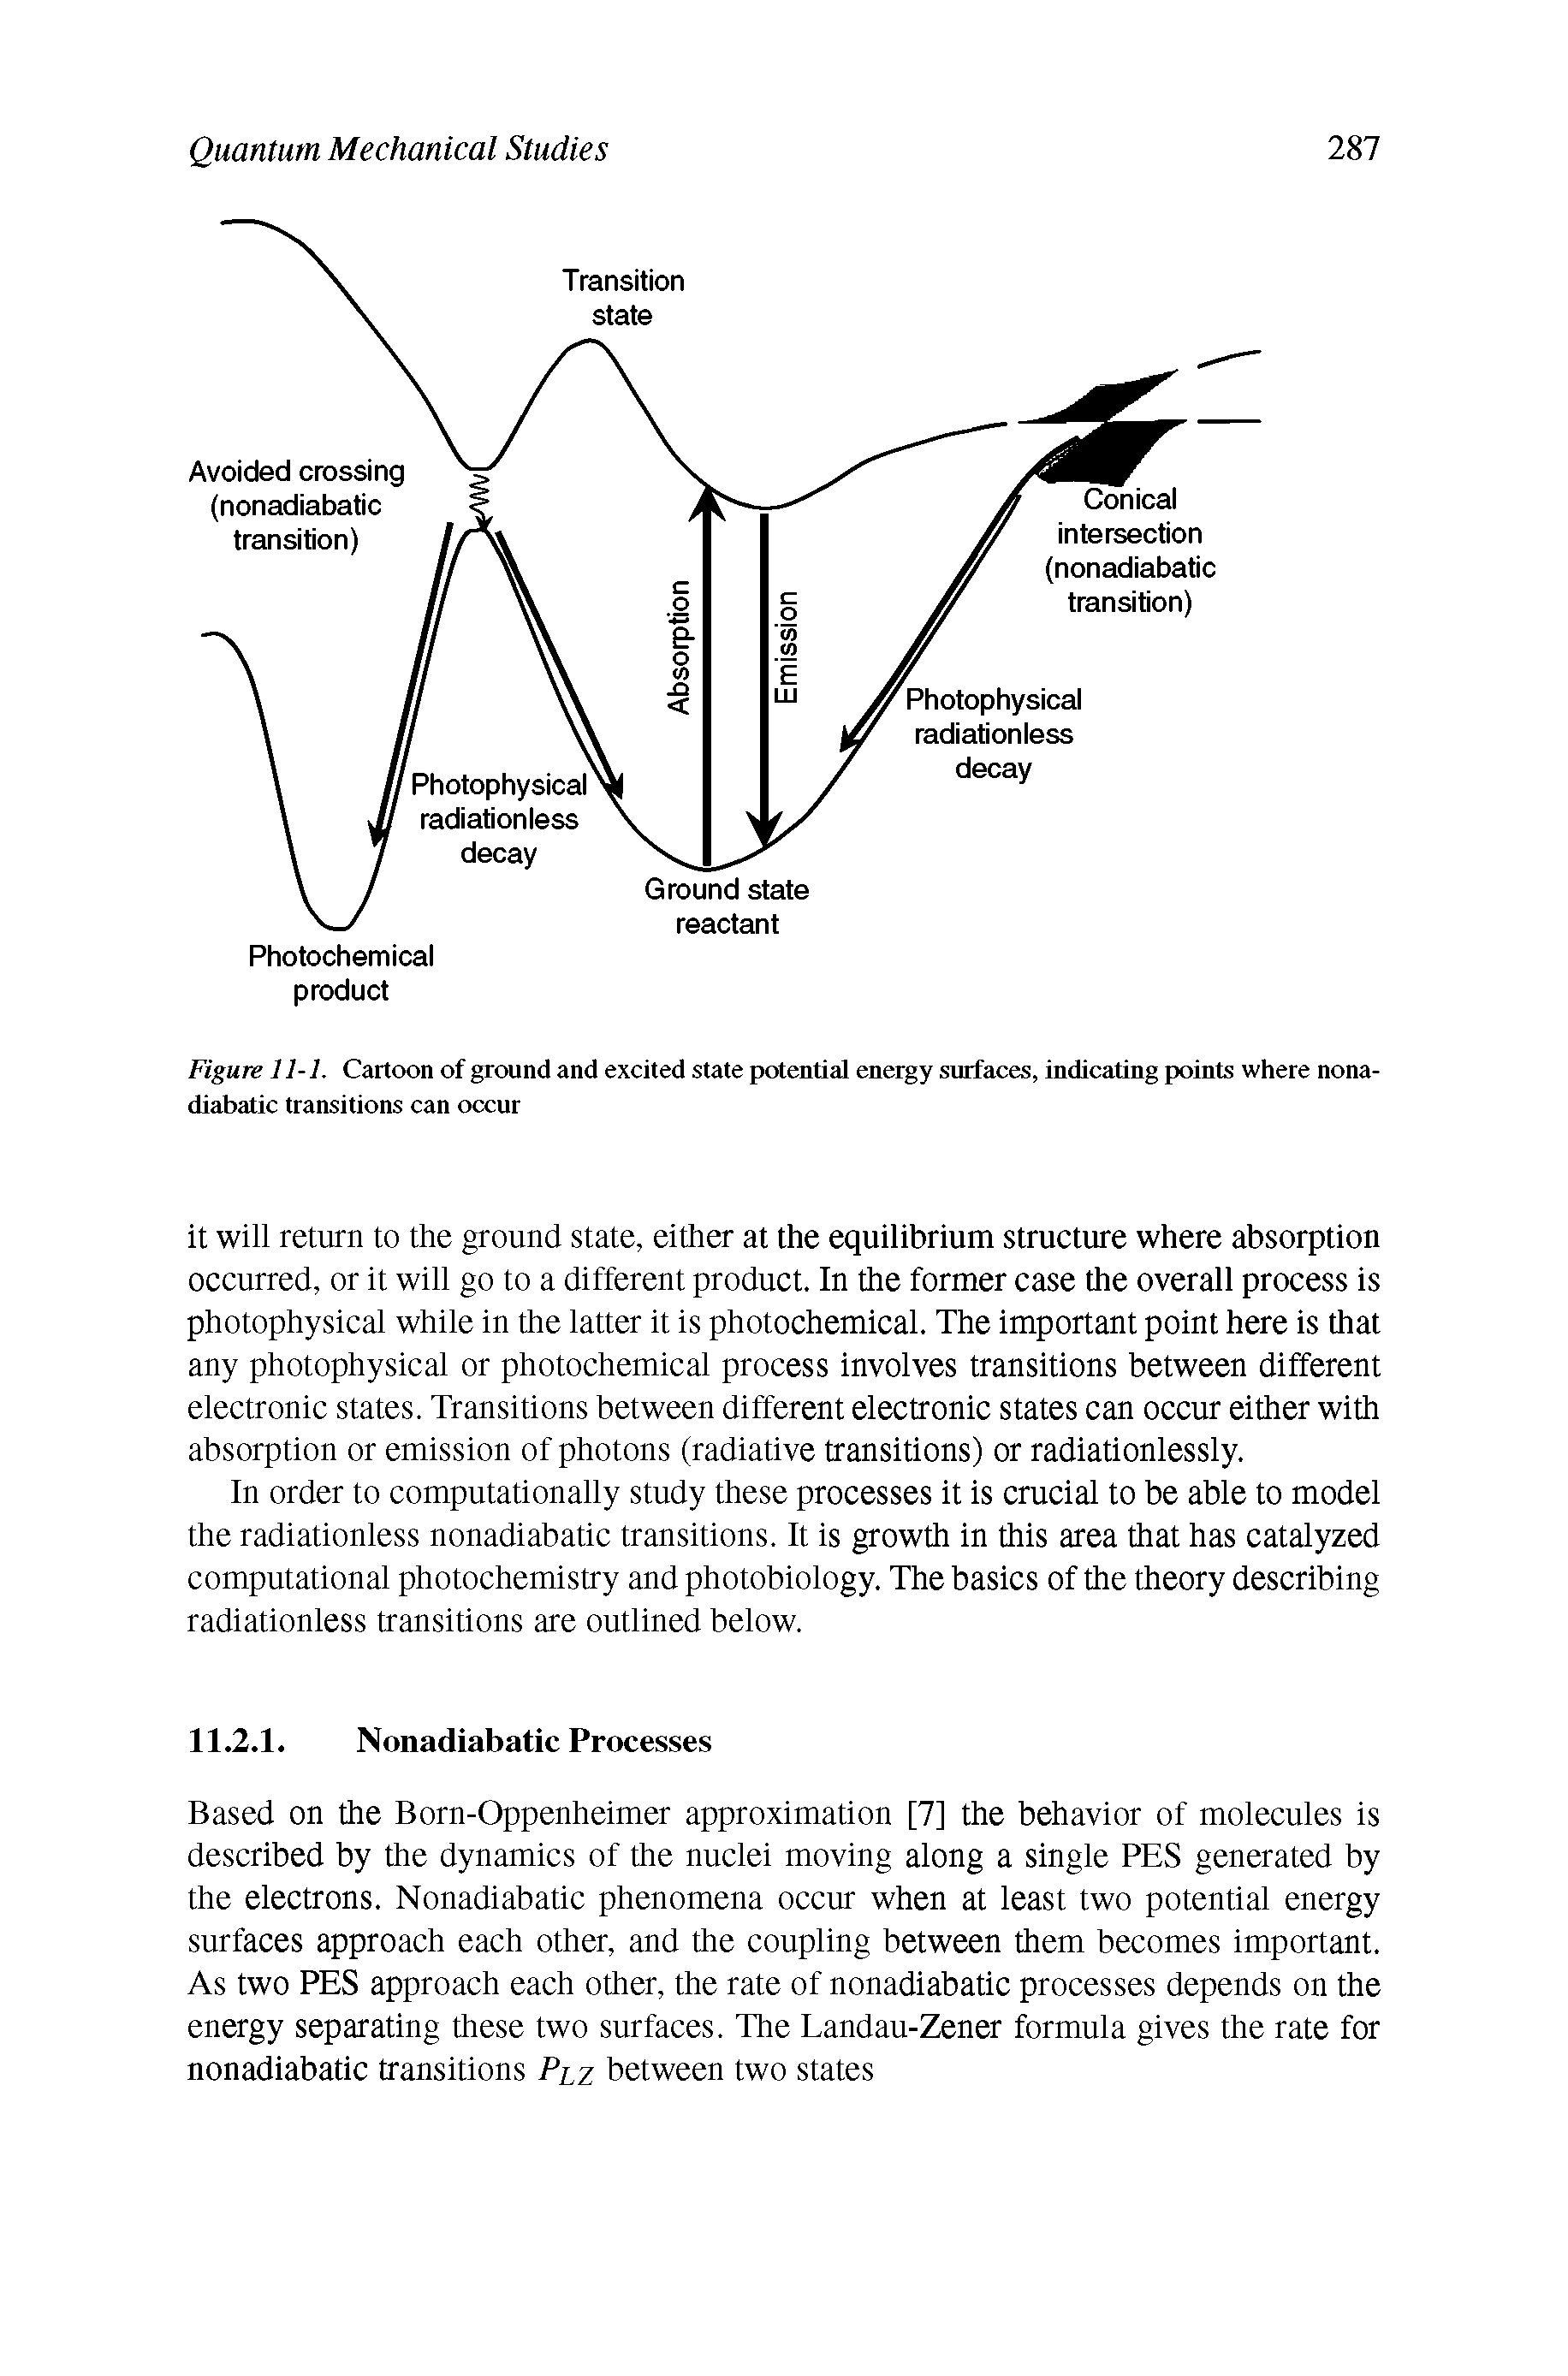 Figure 11-1. Cartoon of ground and excited state potential energy surfaces, indicating points where nona-diabatic transitions can occur...